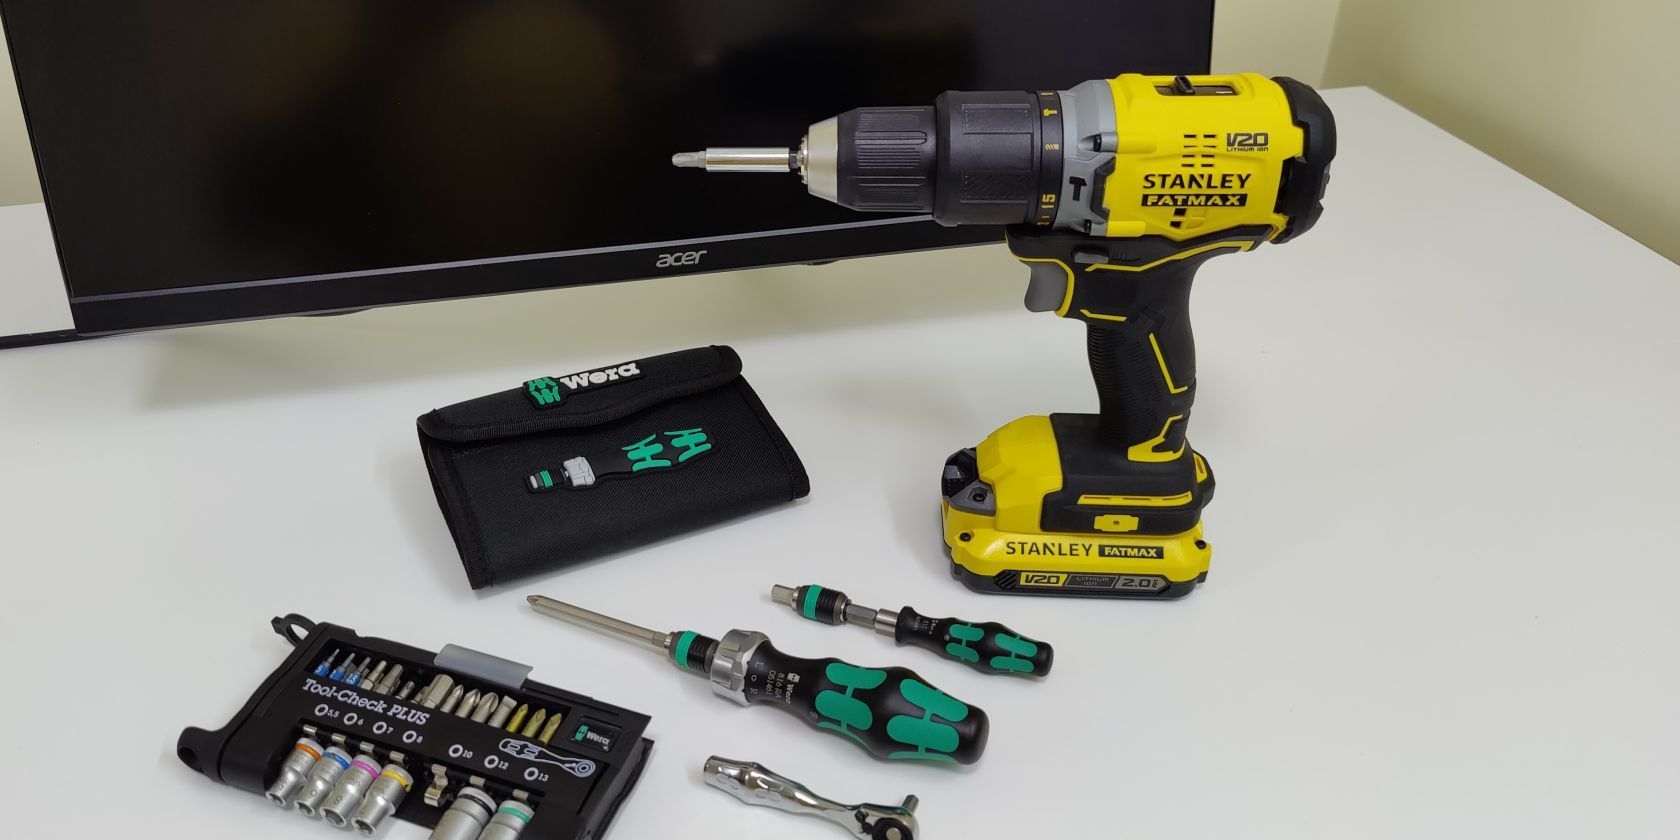 How to Operate Your Cordless Drill Like a Professional